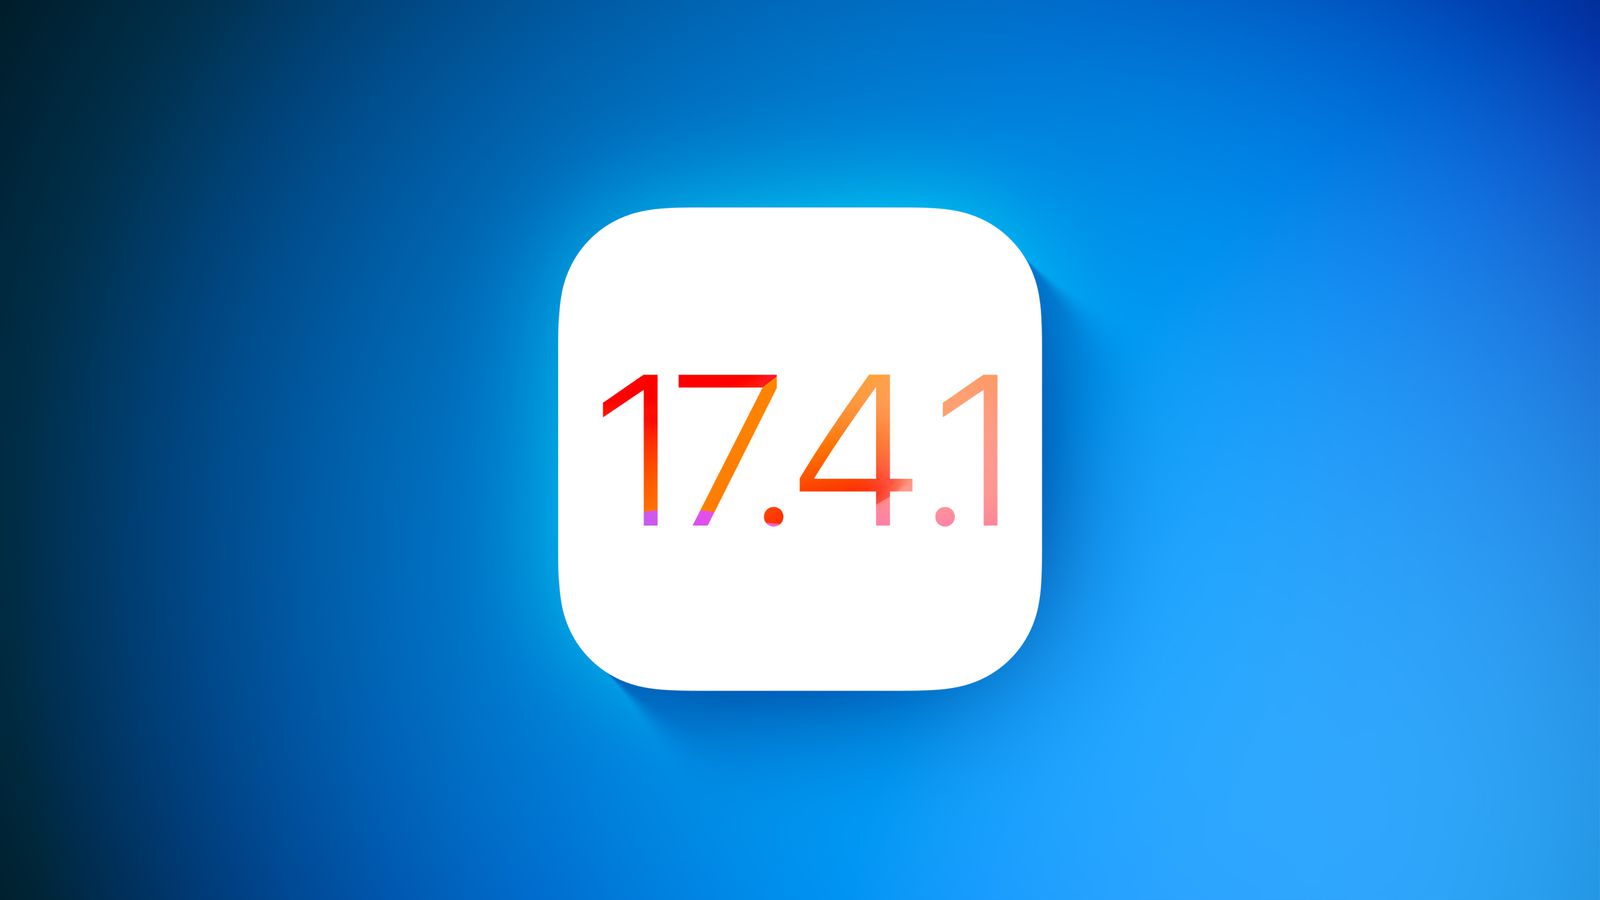 Apple Rolls Out iOS 17.4.1 and iPadOS 17.4.1 Updates for iPhone and iPad Models